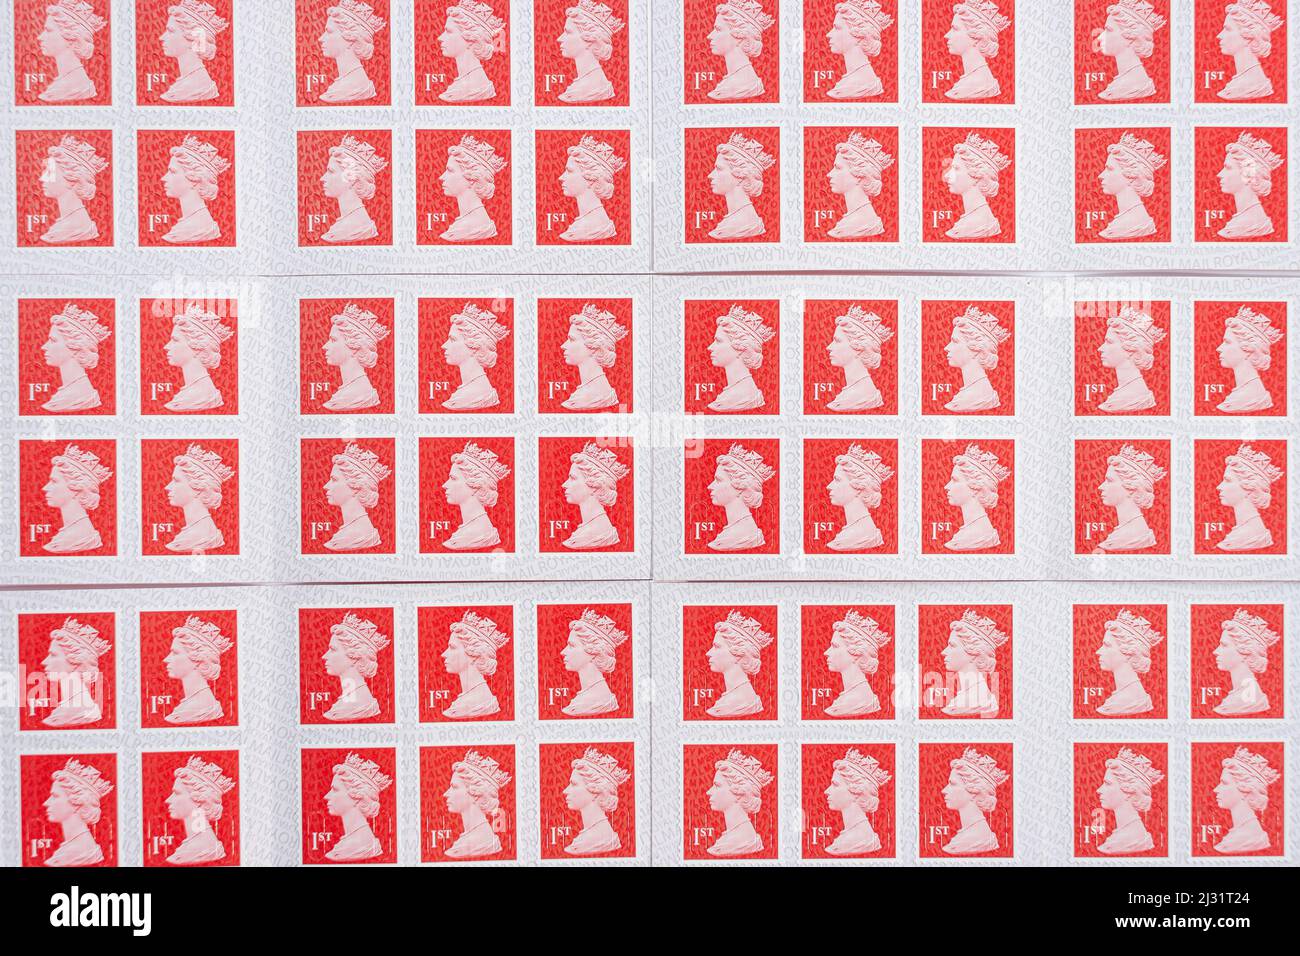 Rows of 1st class stamps Stock Photo